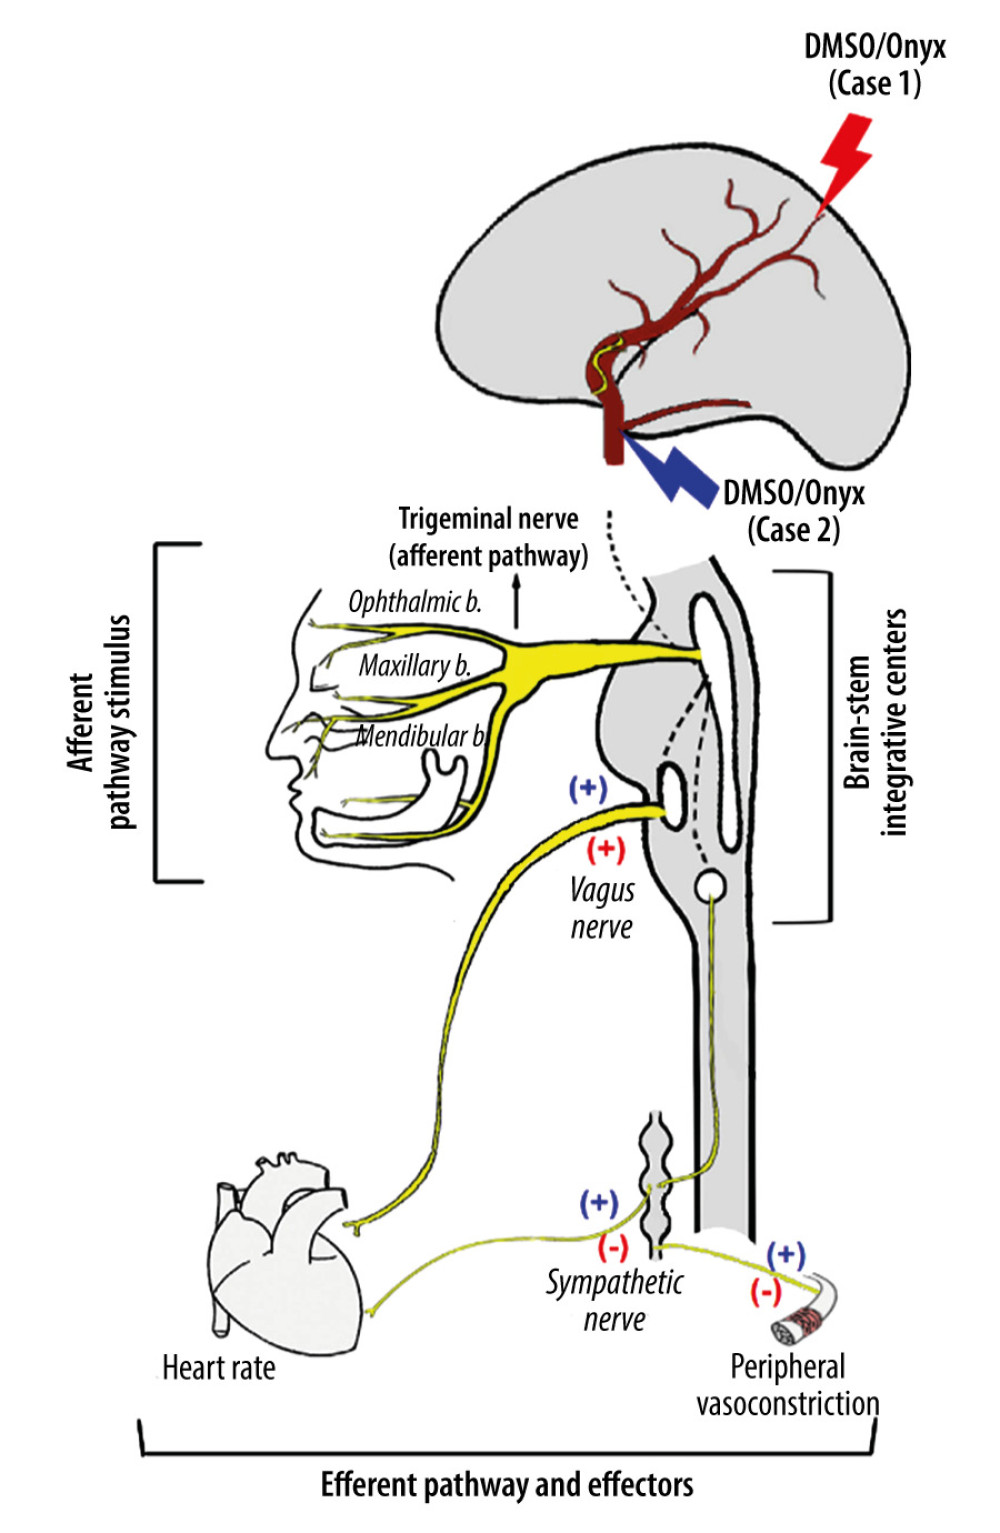 Schematic illustration of the autonomic neural pathways and effectors activated as a consequence of trigeminal nerve stimulation trigged either by peripheral signals from ophthalmic, maxillary, and mandibular branches or central cerebral vascular stimulus (figure modified from Buchholz’s publication [18]). The central TCR, which was stimulated by DMSO/ Onyx injection in the central vessel, induces a strong depressive response by a reciprocal activation of the parasympathetic system and an inhibition of the sympathetic system (red symbols). The peripheral TCR, which was stimulated by DMSO/Onyx injection in the peripheral vessels, involves simultaneous co-activation of both autonomic limbs (blue symbols).